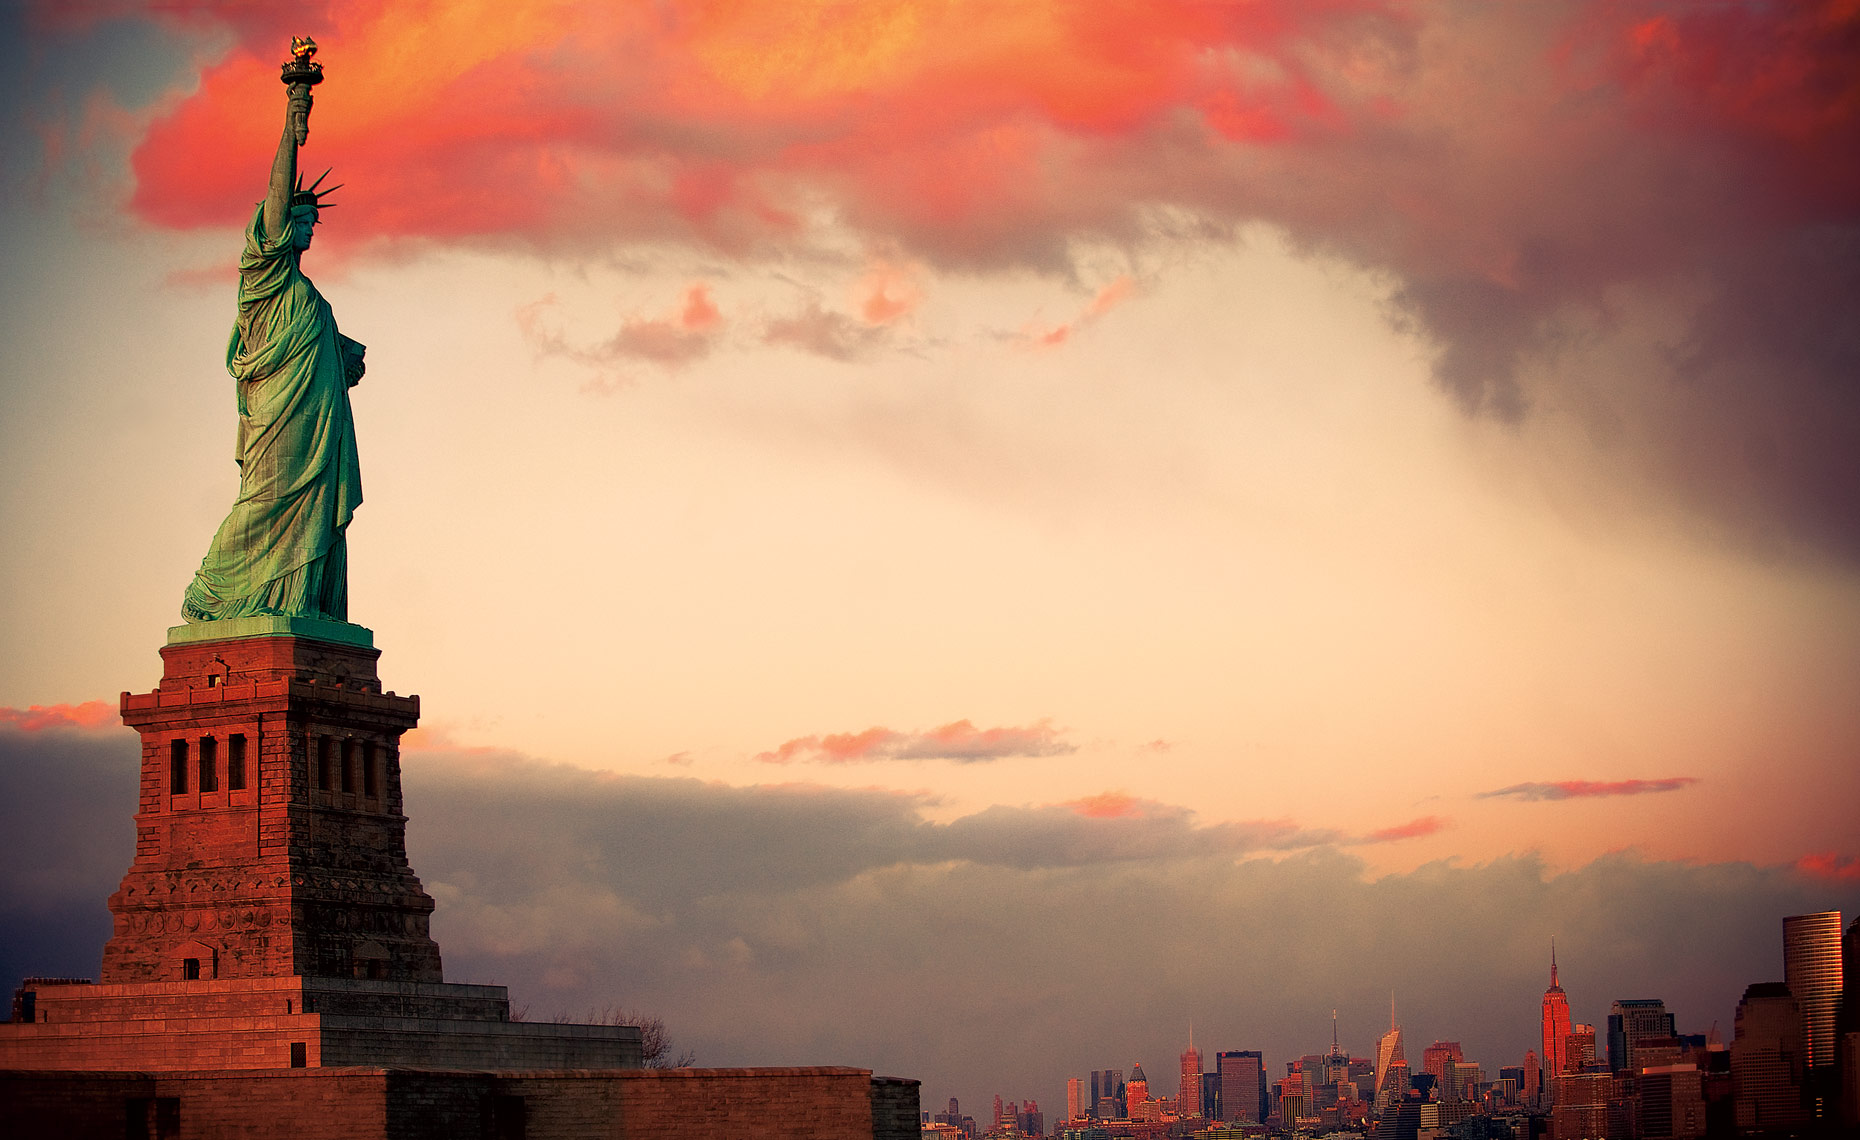 the statue of liberty at sunset, new york postcard.